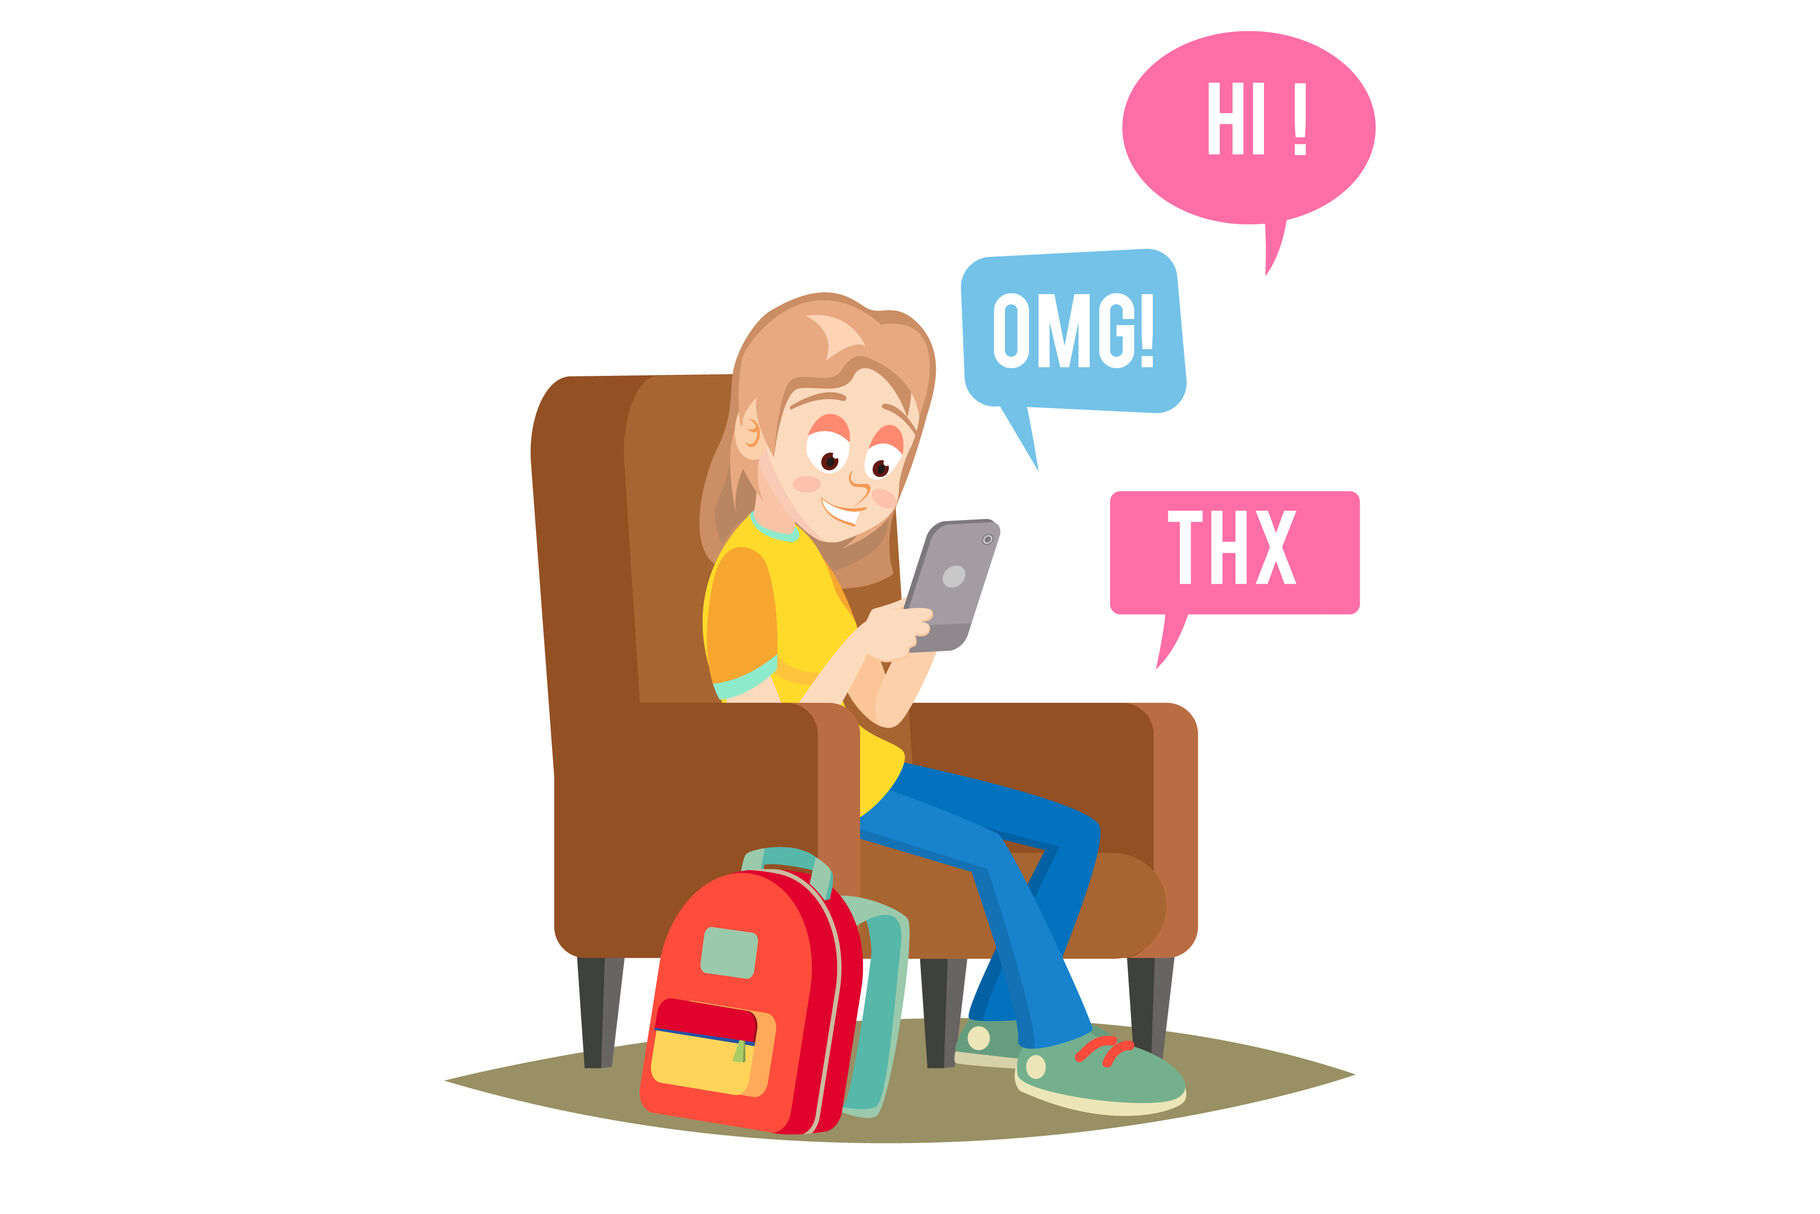 Young girl chatting with her friends and family online by video call app  with laptop. Group chatting, Social media technology concept illustration.  Flat design style cartoon character. Stock Vector